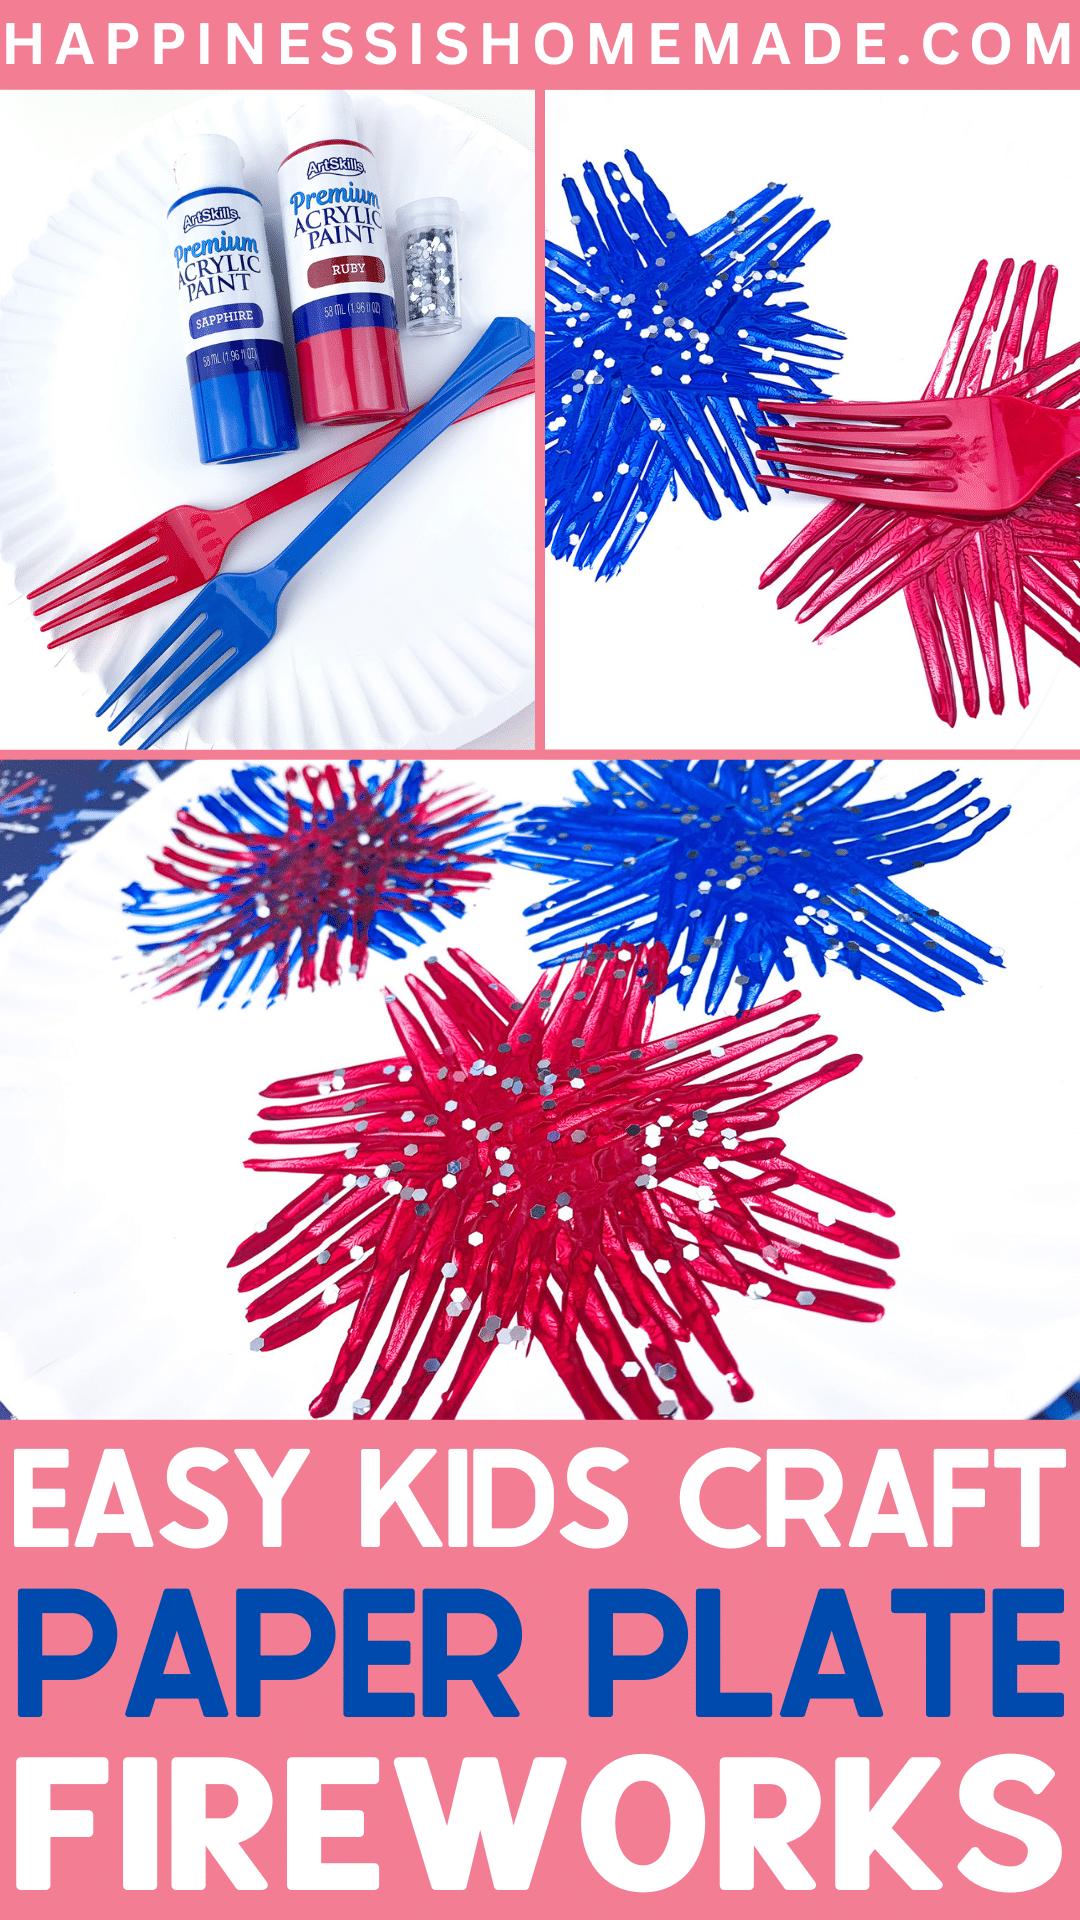 Easy Kids Craft Paper Plate Fireworks 